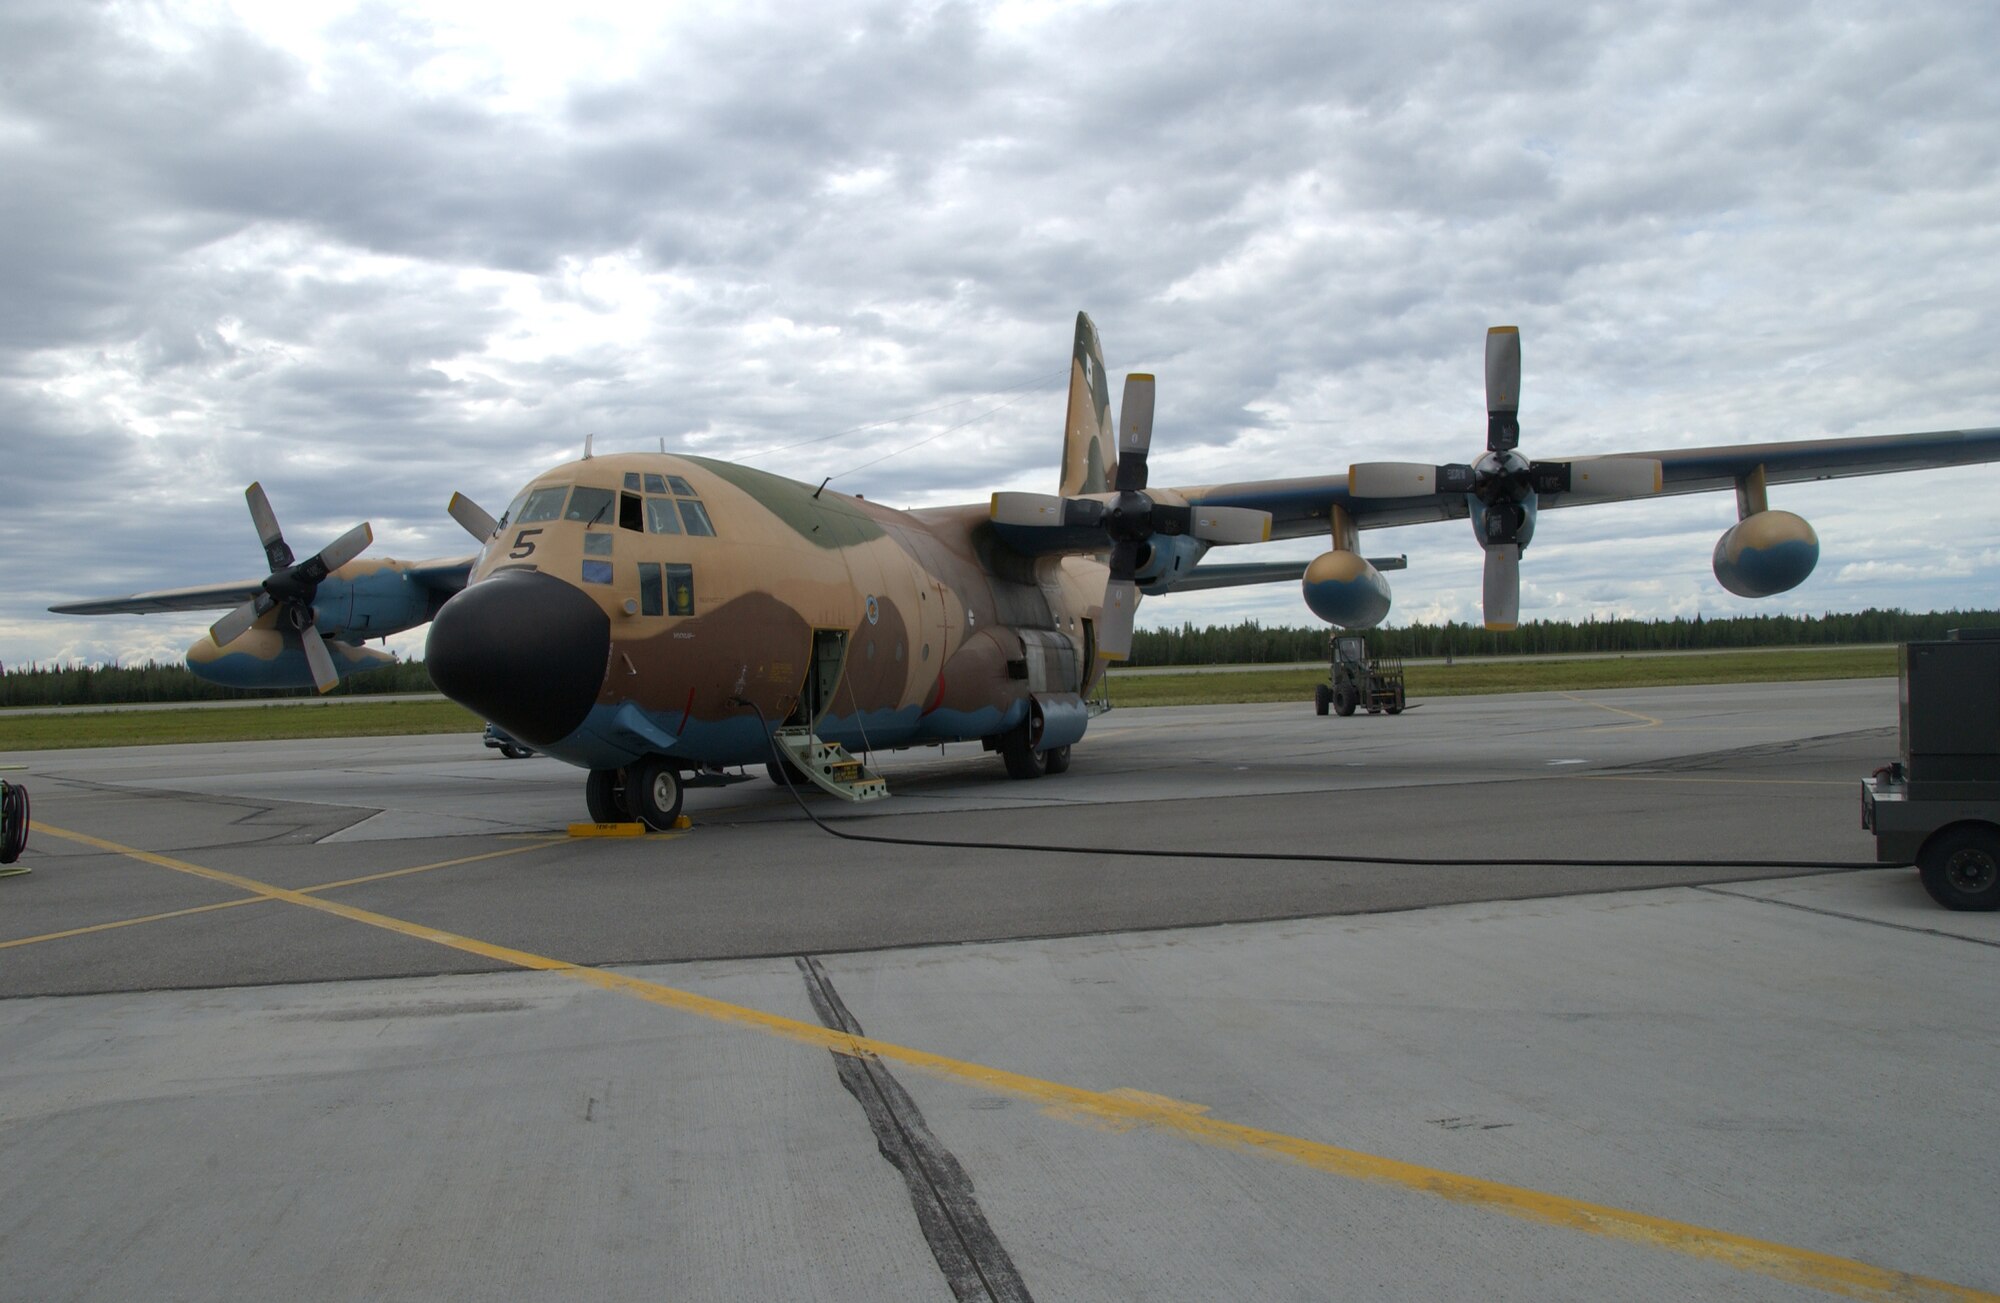 EIELSON AIR FORCE BASE, Alaska -- A Spanish Air Force C-130 parks on the Eielson AFB flight line to unload cargo for their stay during Red Flag-Alaska 07-3 July10, 2007. These exercises are conducted on the Pacific Alaskan Range Complex with air operations flown out of Eielson and Elmendorf Air Force bases in Alaska. (U.S. Air Force photo by Airman 1st Class Christopher Griffin) 